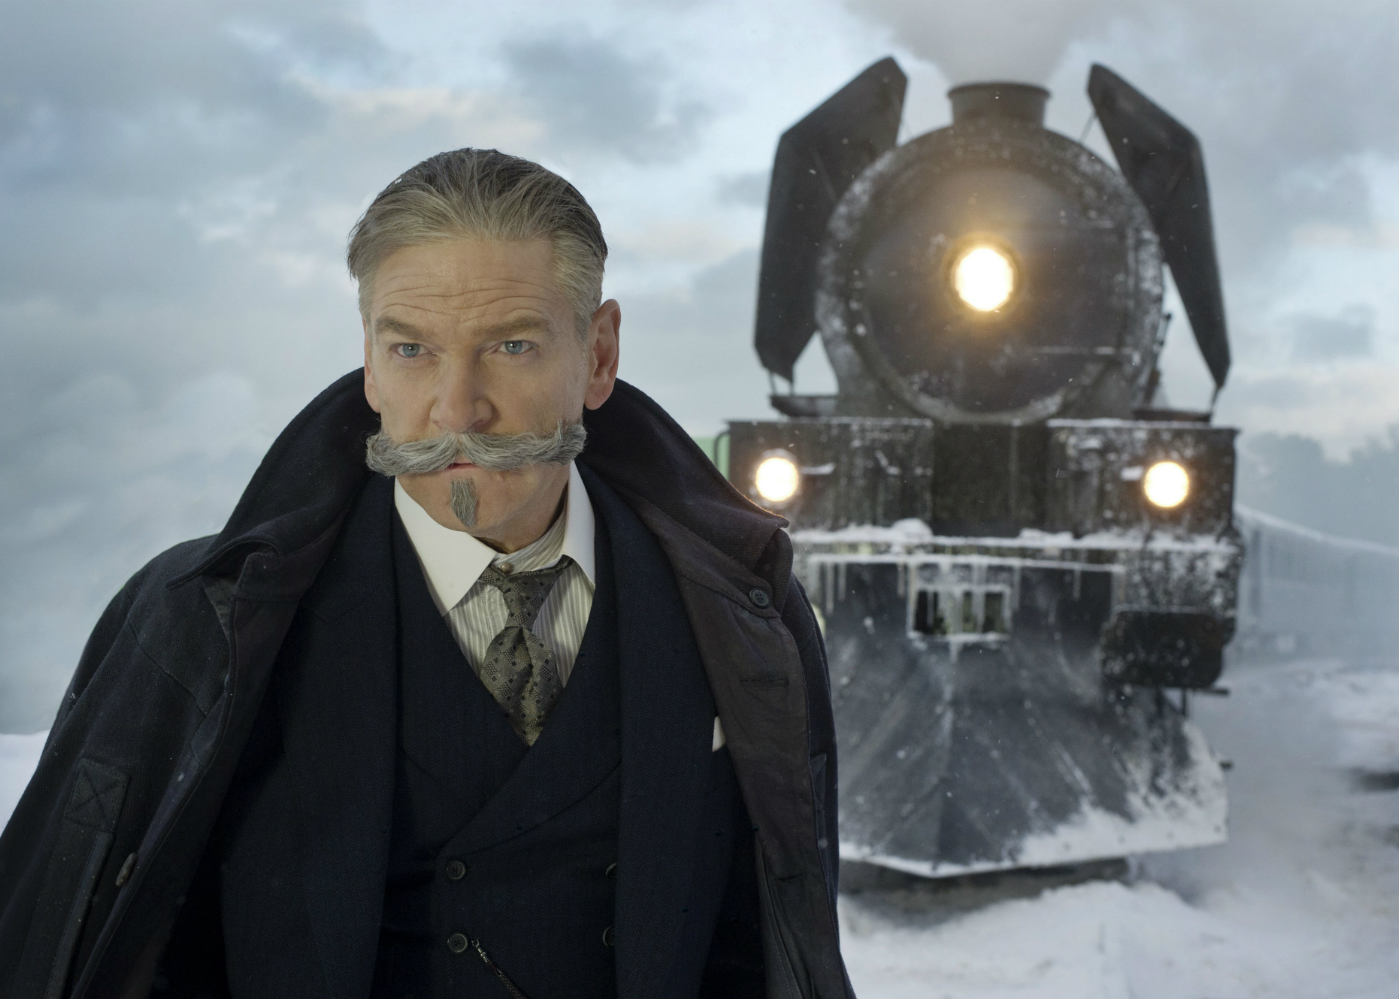 Murder on the Orient Express Trailer: An All-Star Cast Takes on a Classic